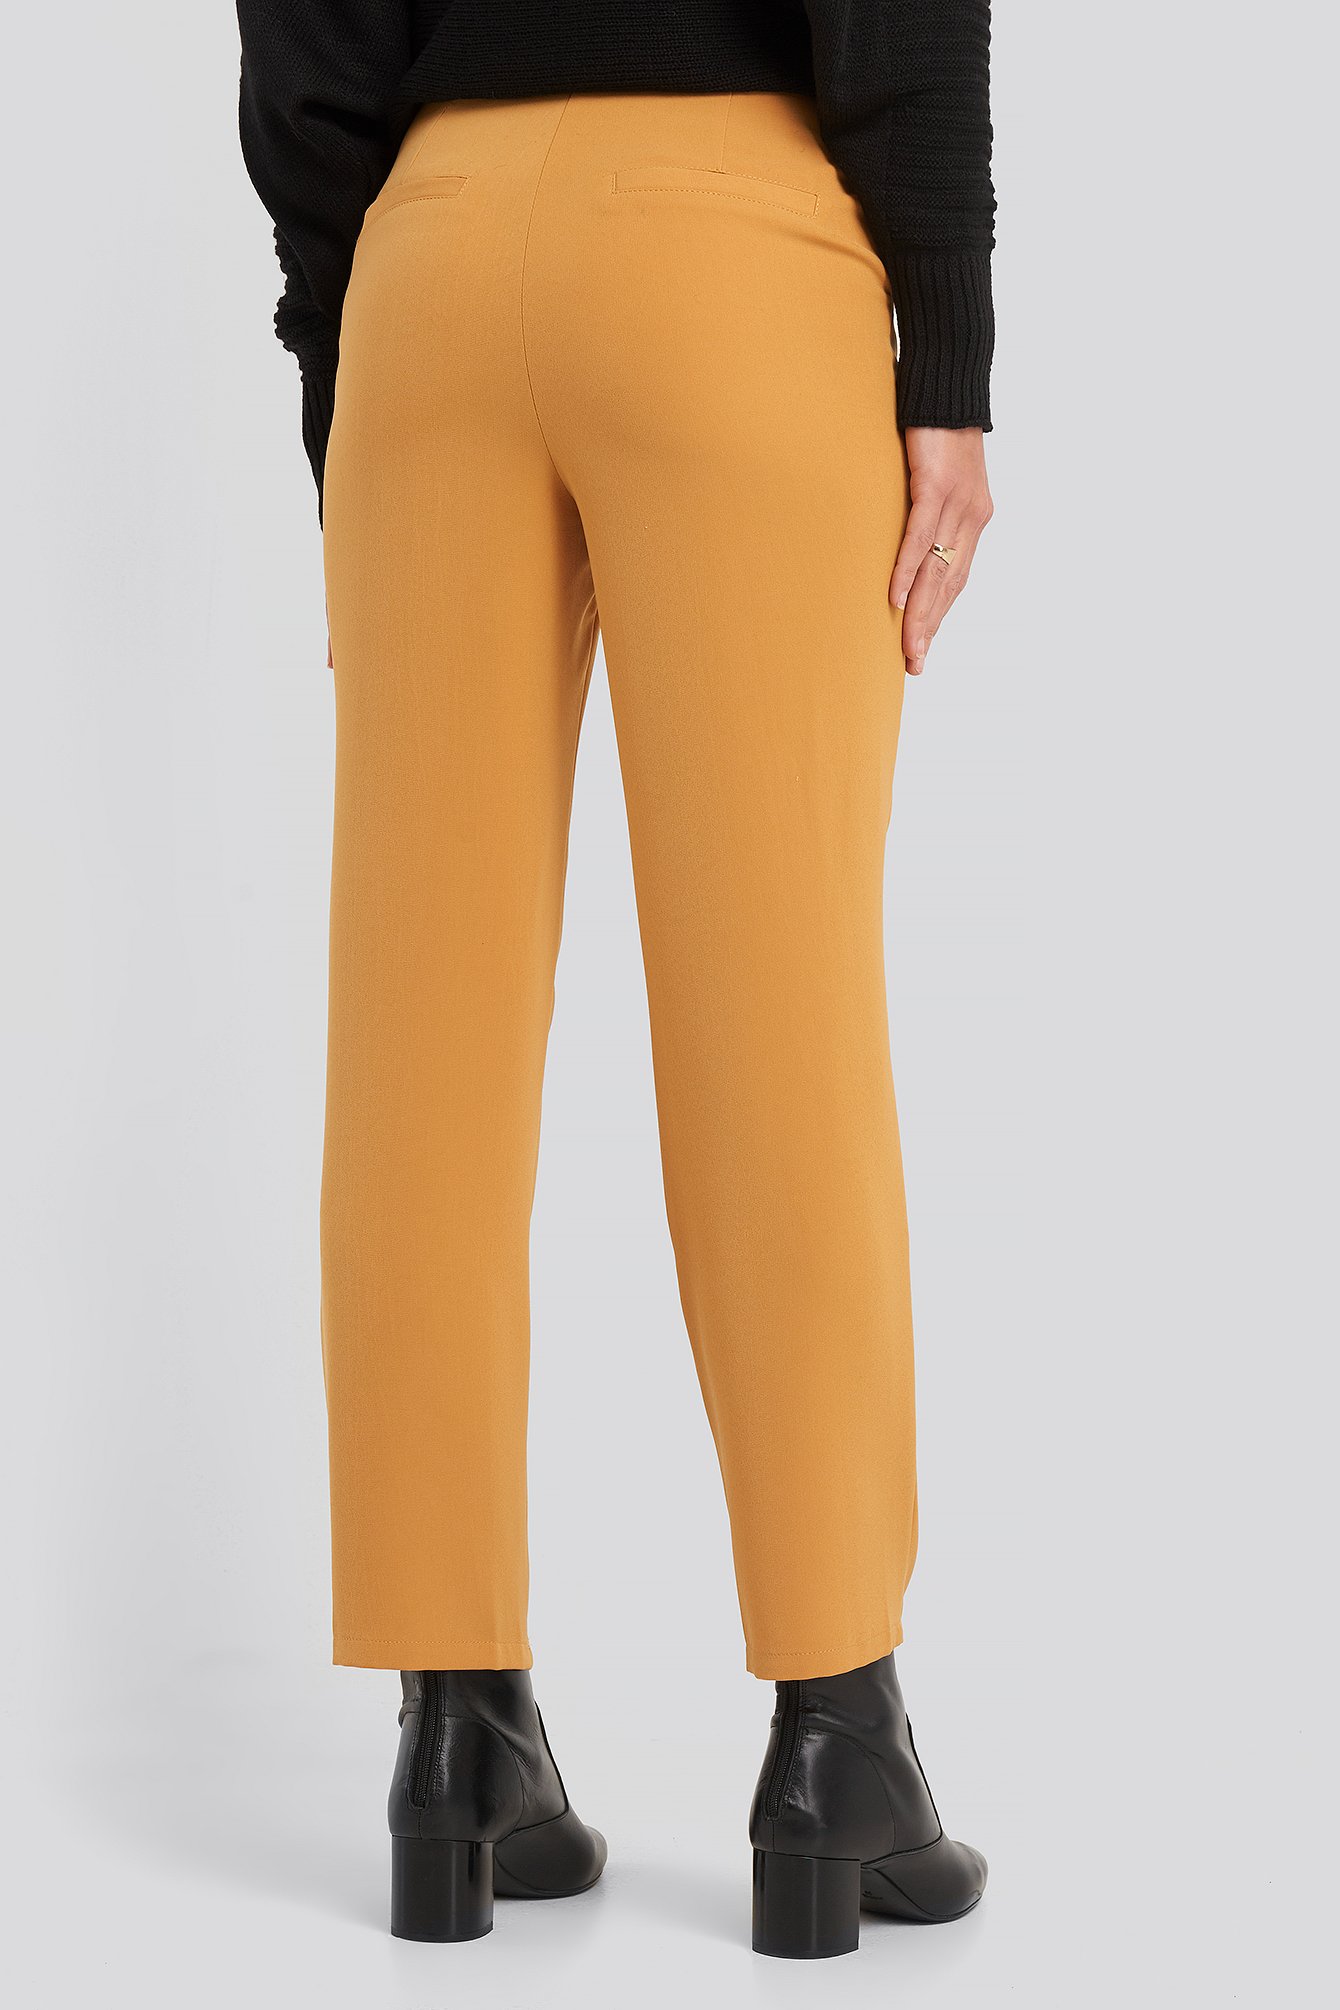 Yellow High Waist Suit Trousers